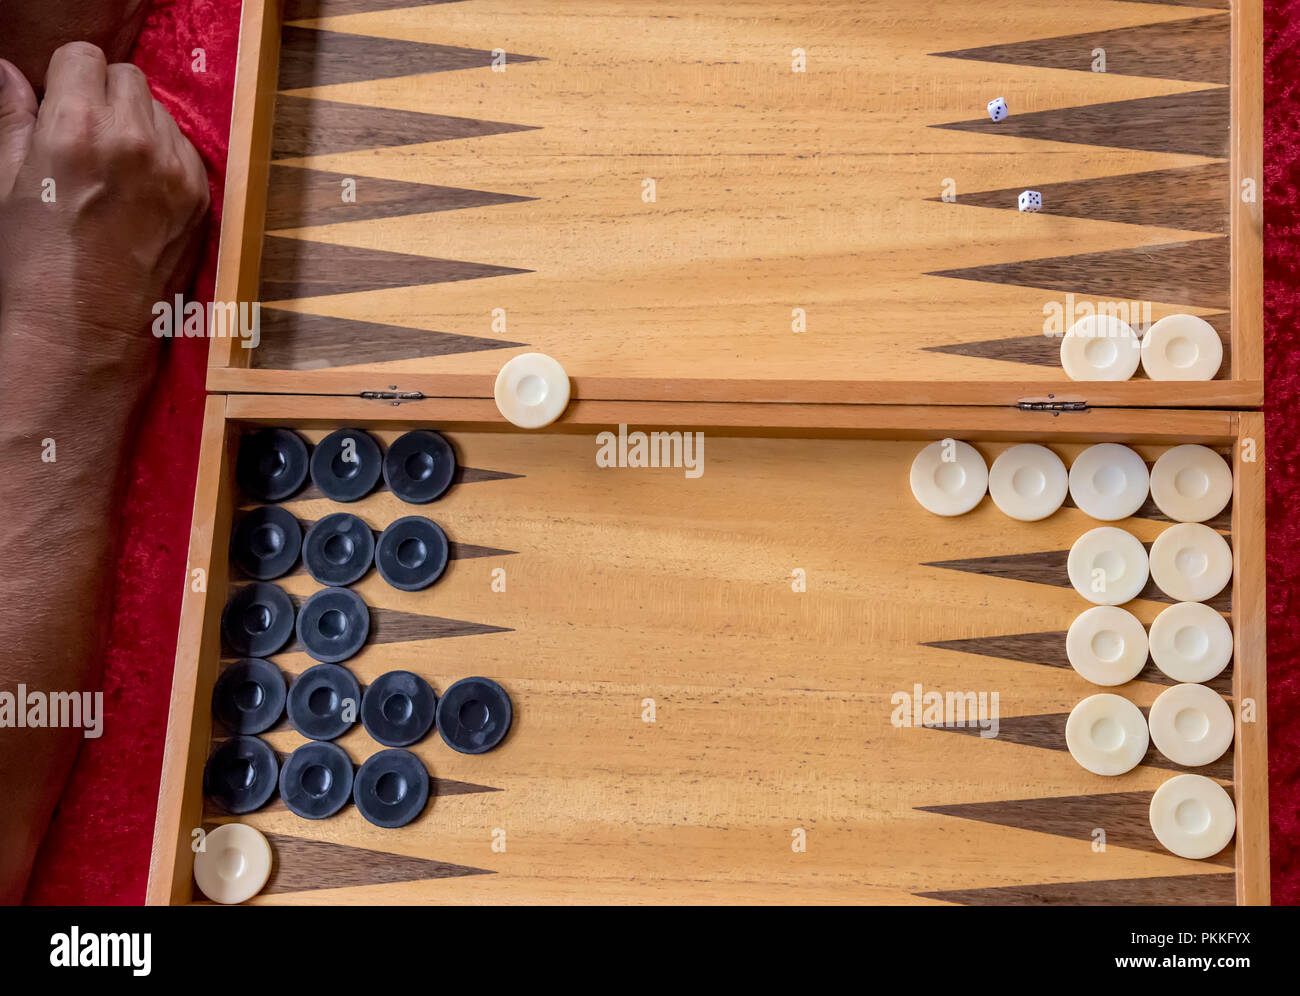 man throws dice while playing tabla. Top view Stock Photo